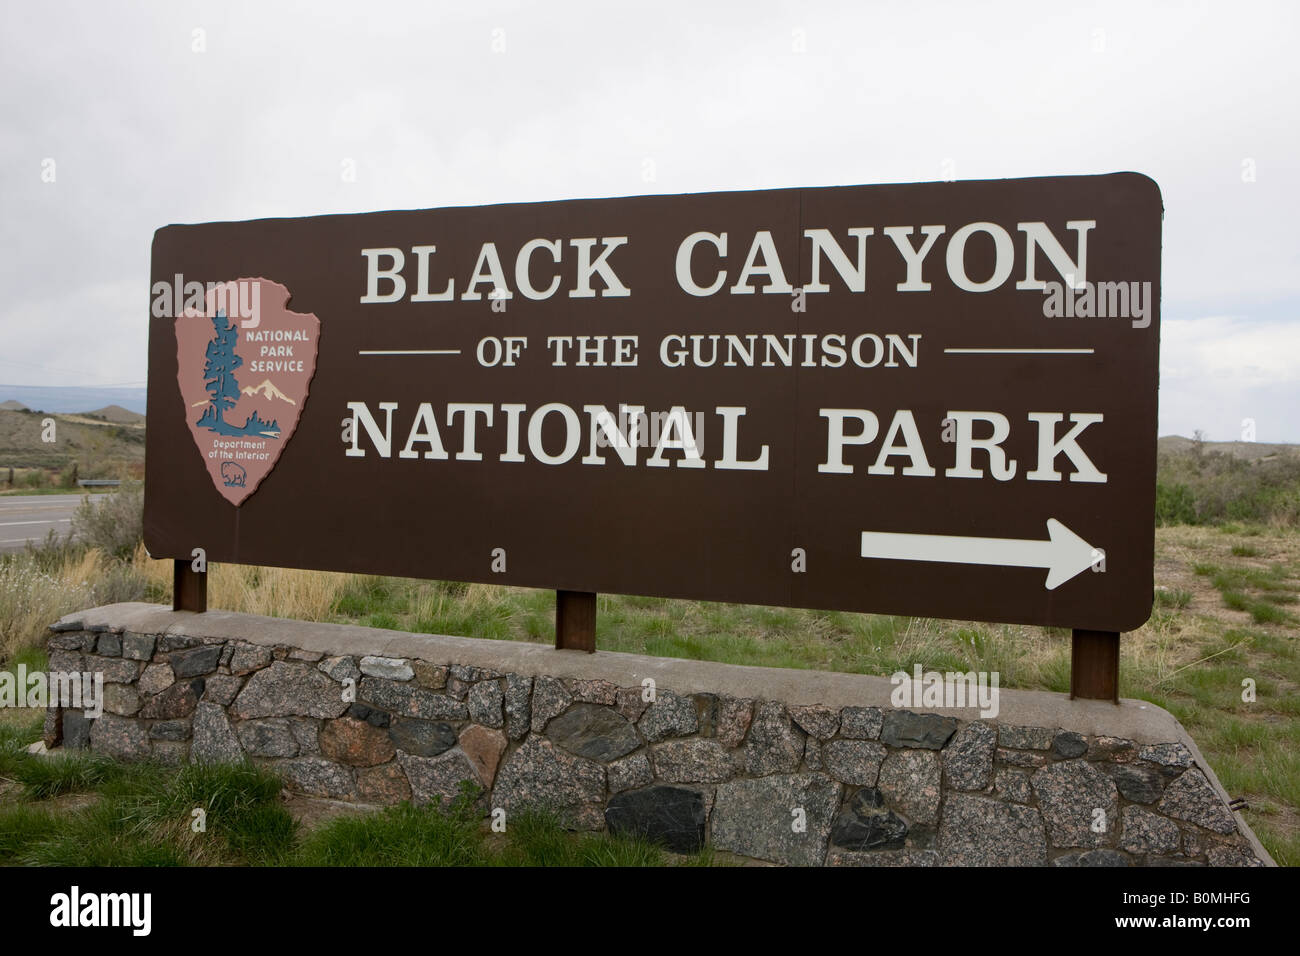 National Park Service welcome sign at the southern entrance to Black Canyon of the Gunnison National Park Montrose Colorado USA Stock Photo